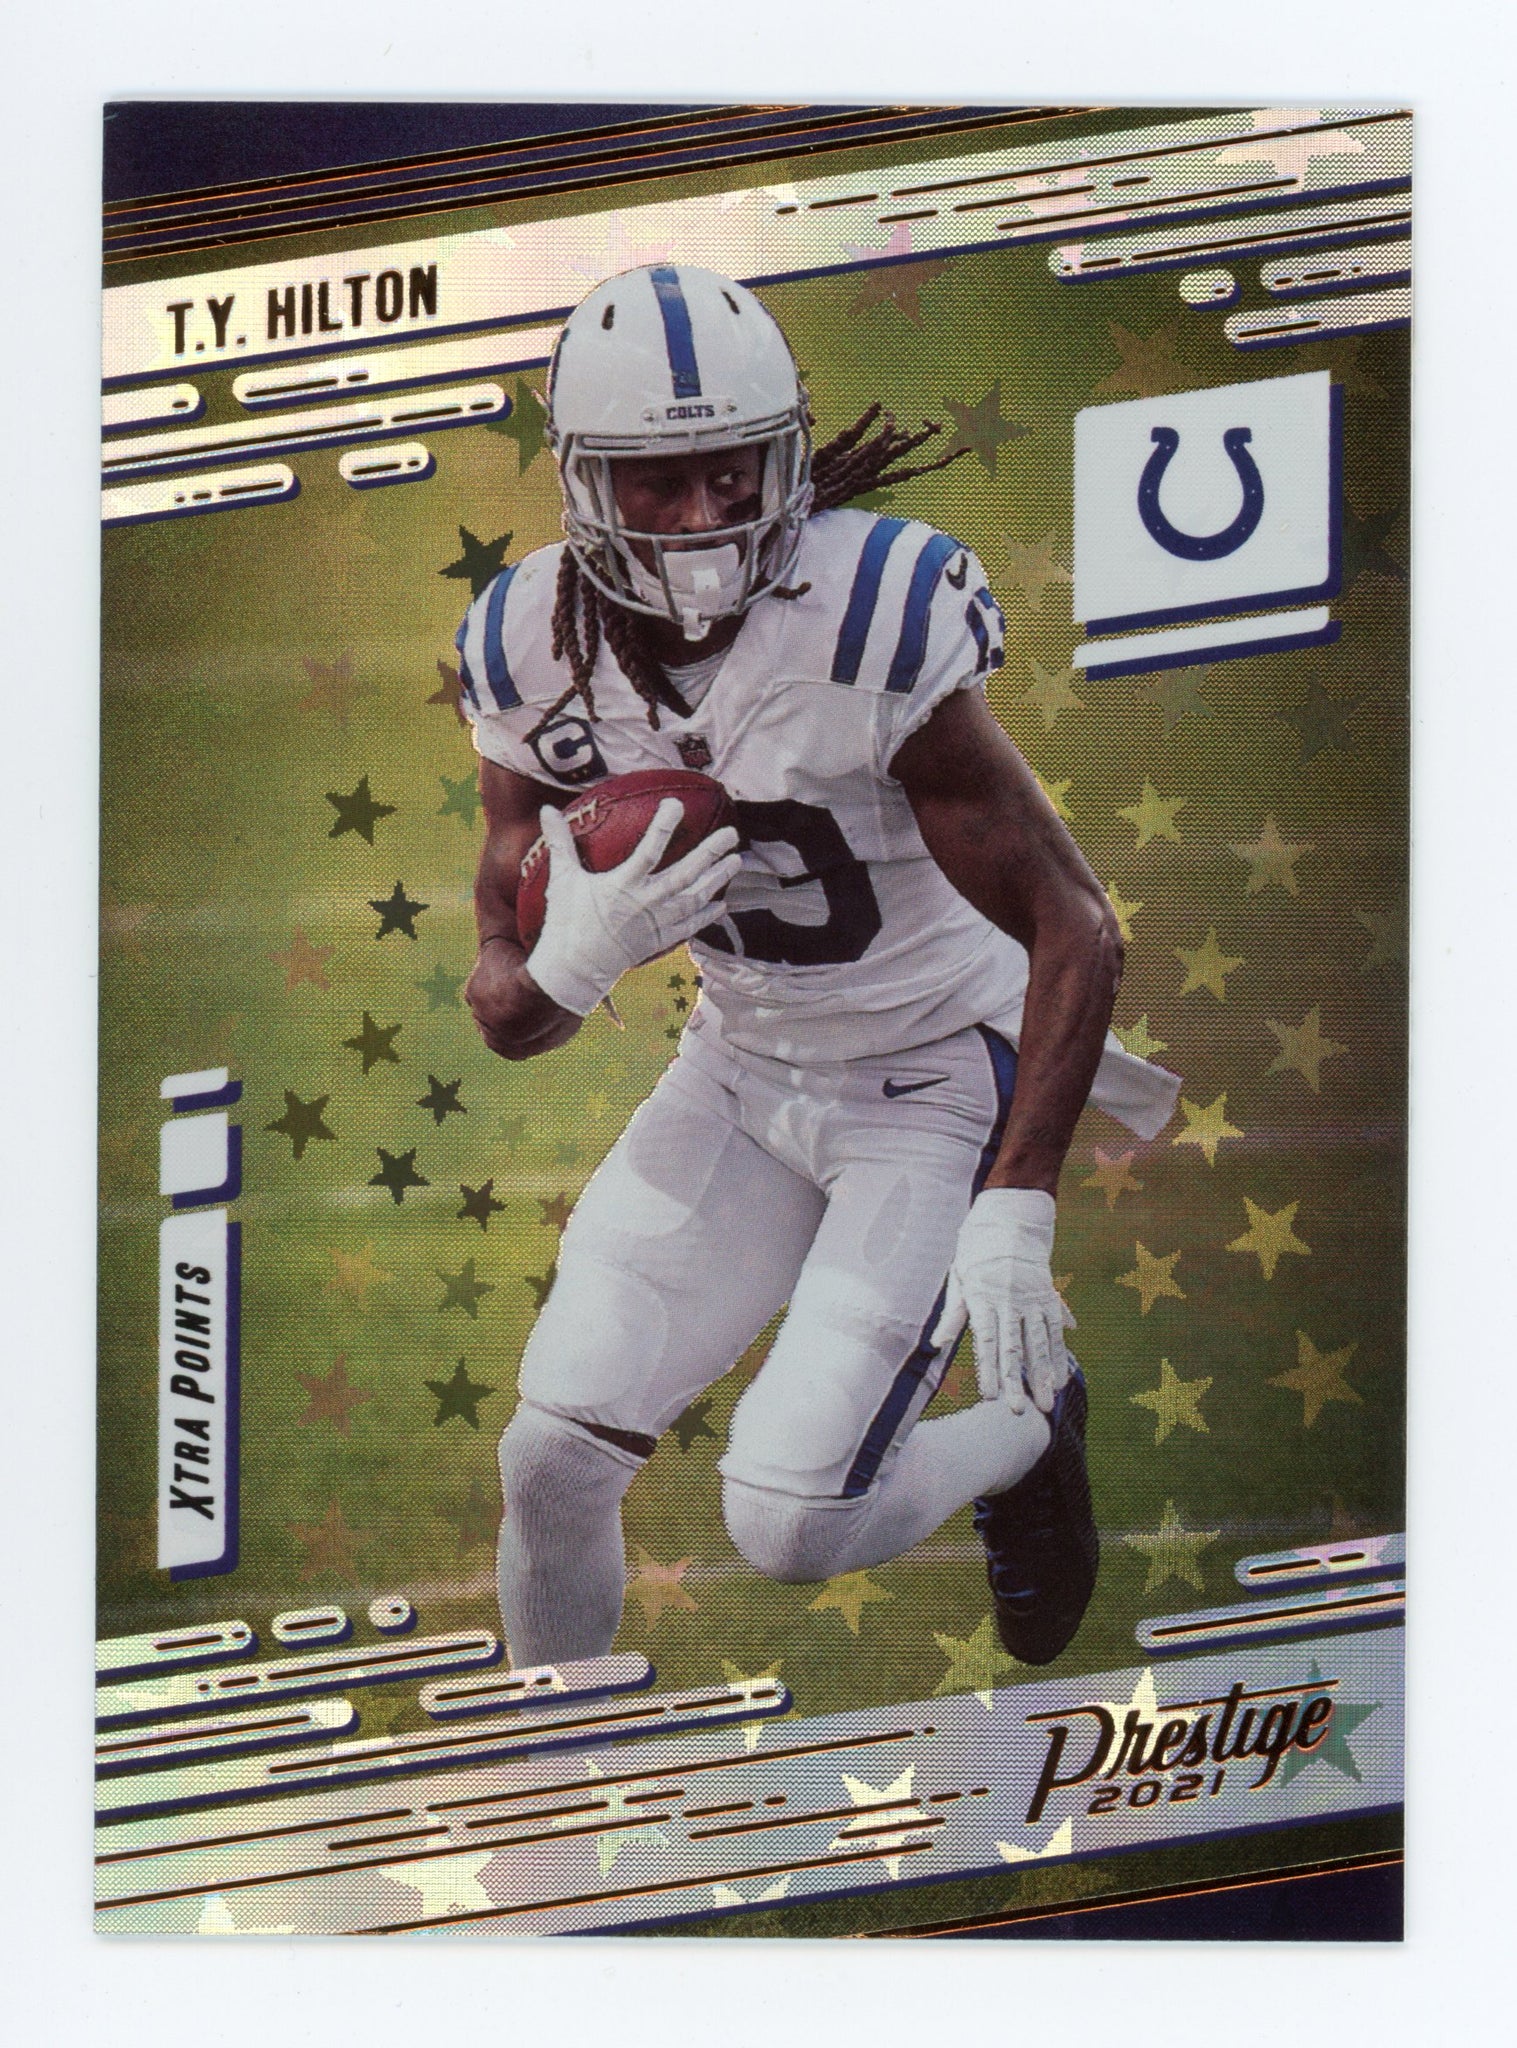 T.Y. Hilton Panini 2020-2021 Prestige Xtra Points Astral Indianapolis Colts #81